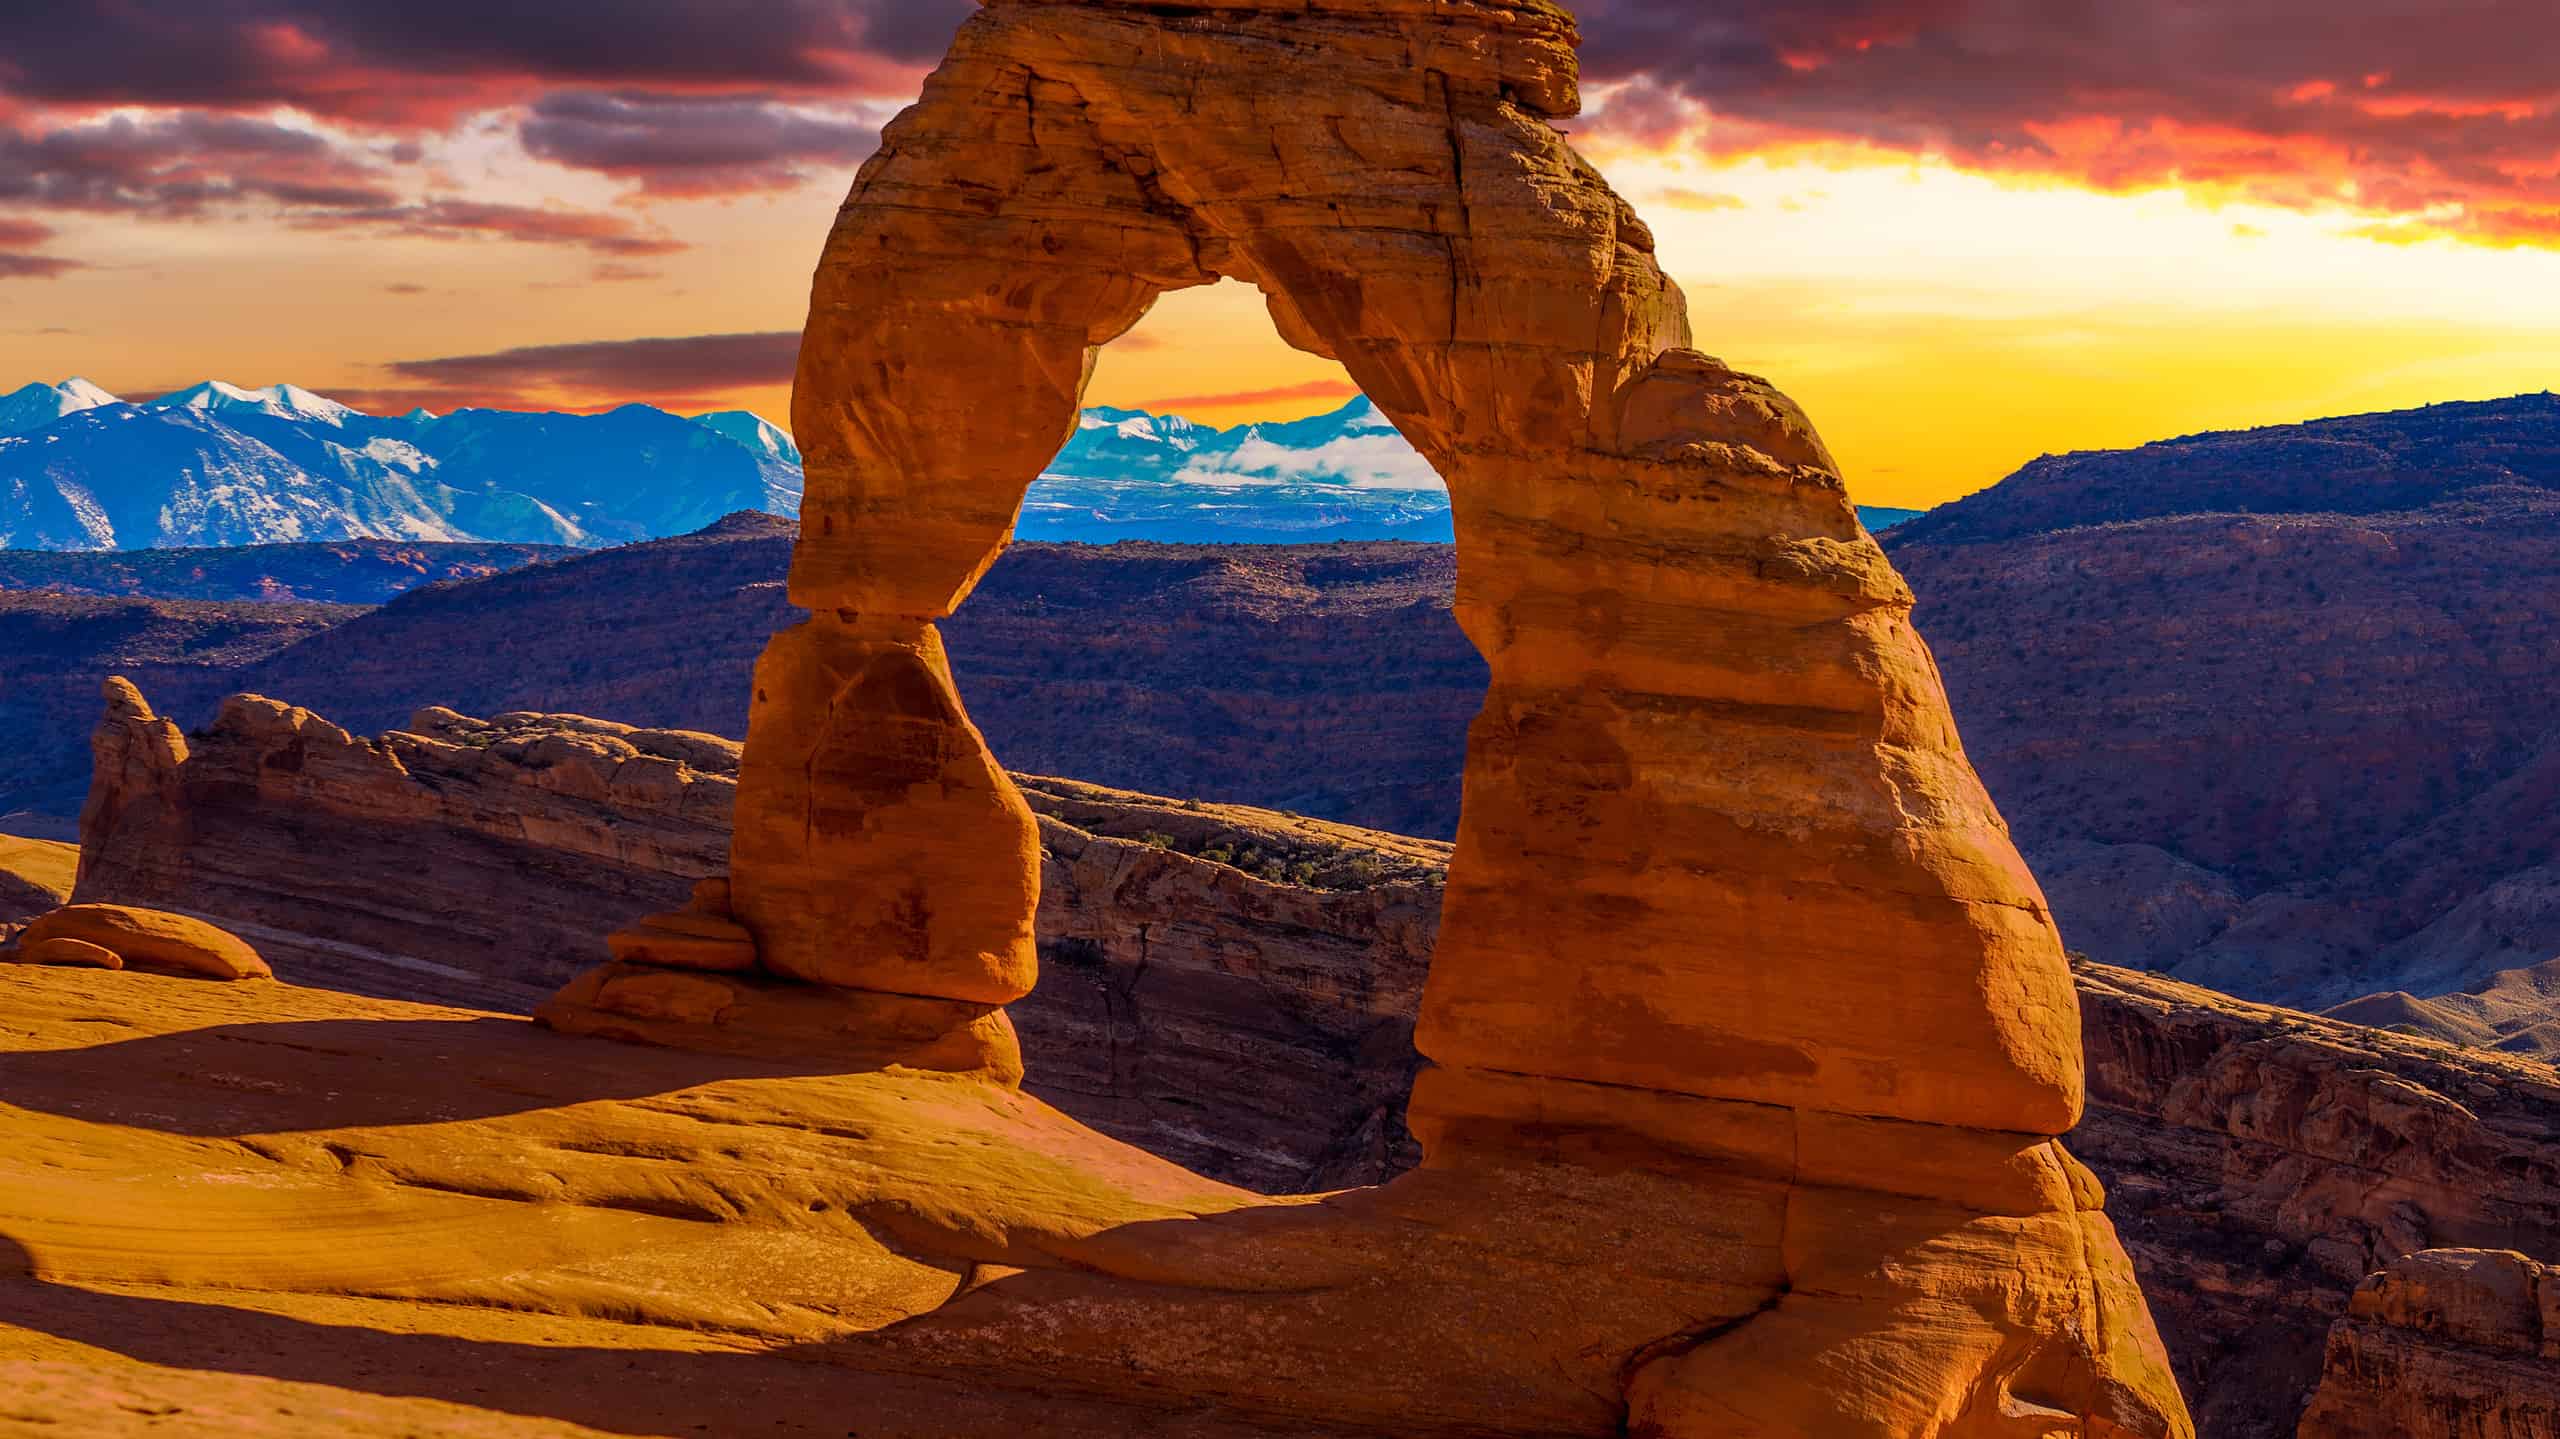 This beautiful sunset image was taken at Delicate Arch in Arches National Park.